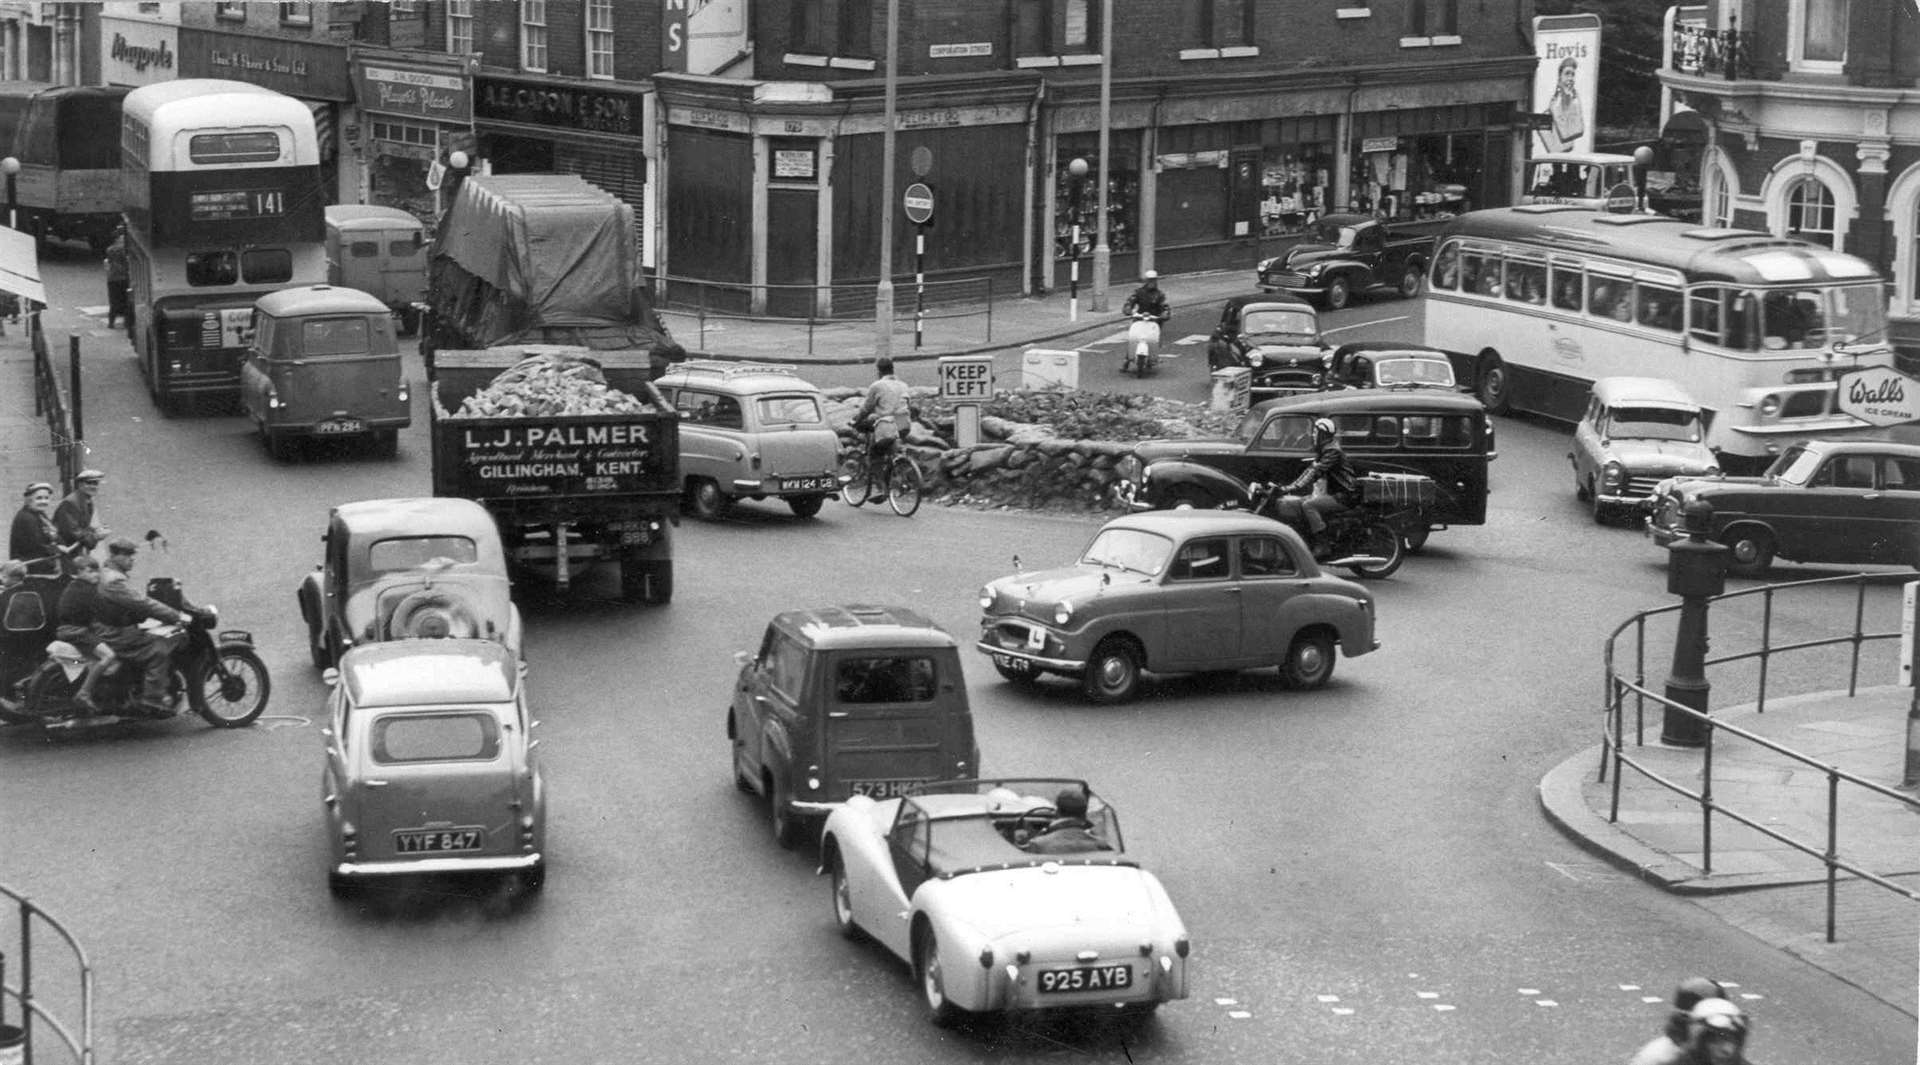 Every vehicle for itself at the foot of Star Hill, Rochester, in the 1950s!